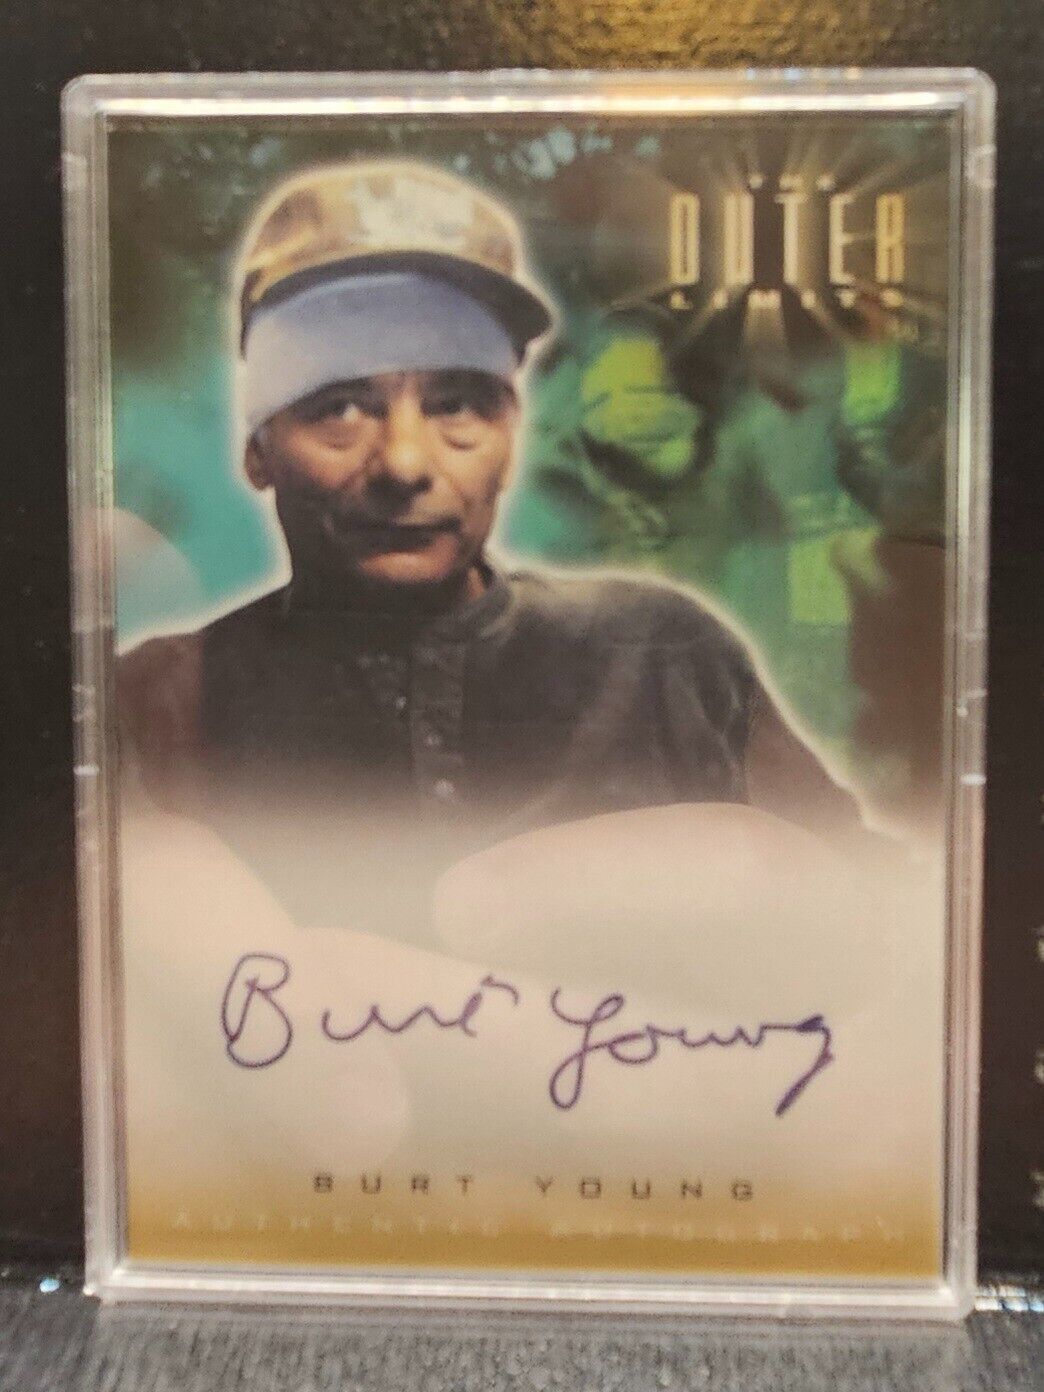 Burt Young The Outer Limits, Rocky Rittenhouse Autograph Card A9